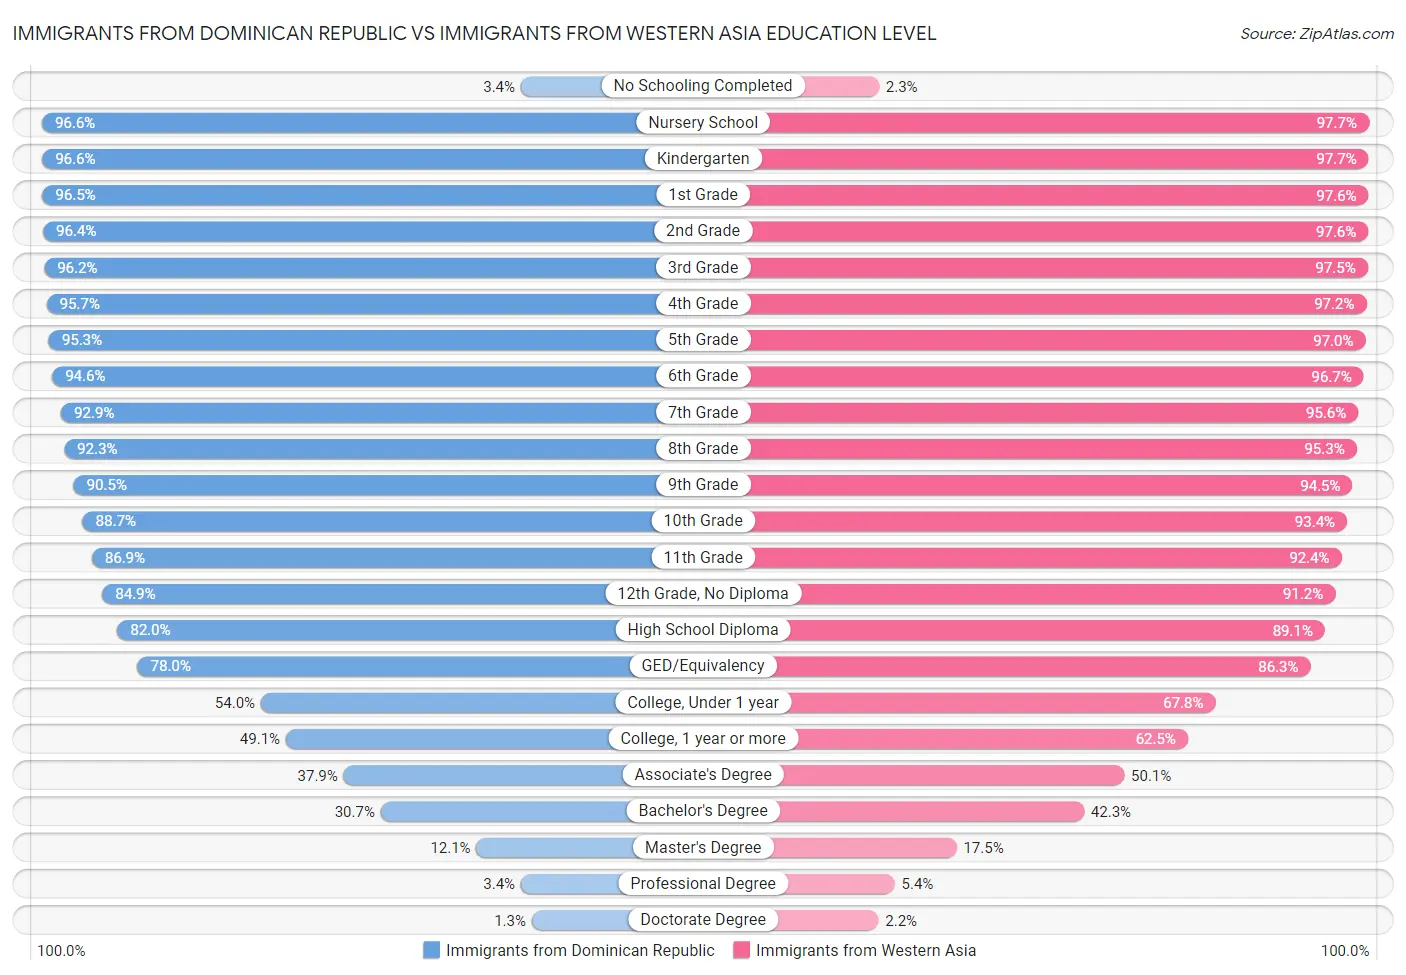 Immigrants from Dominican Republic vs Immigrants from Western Asia Education Level